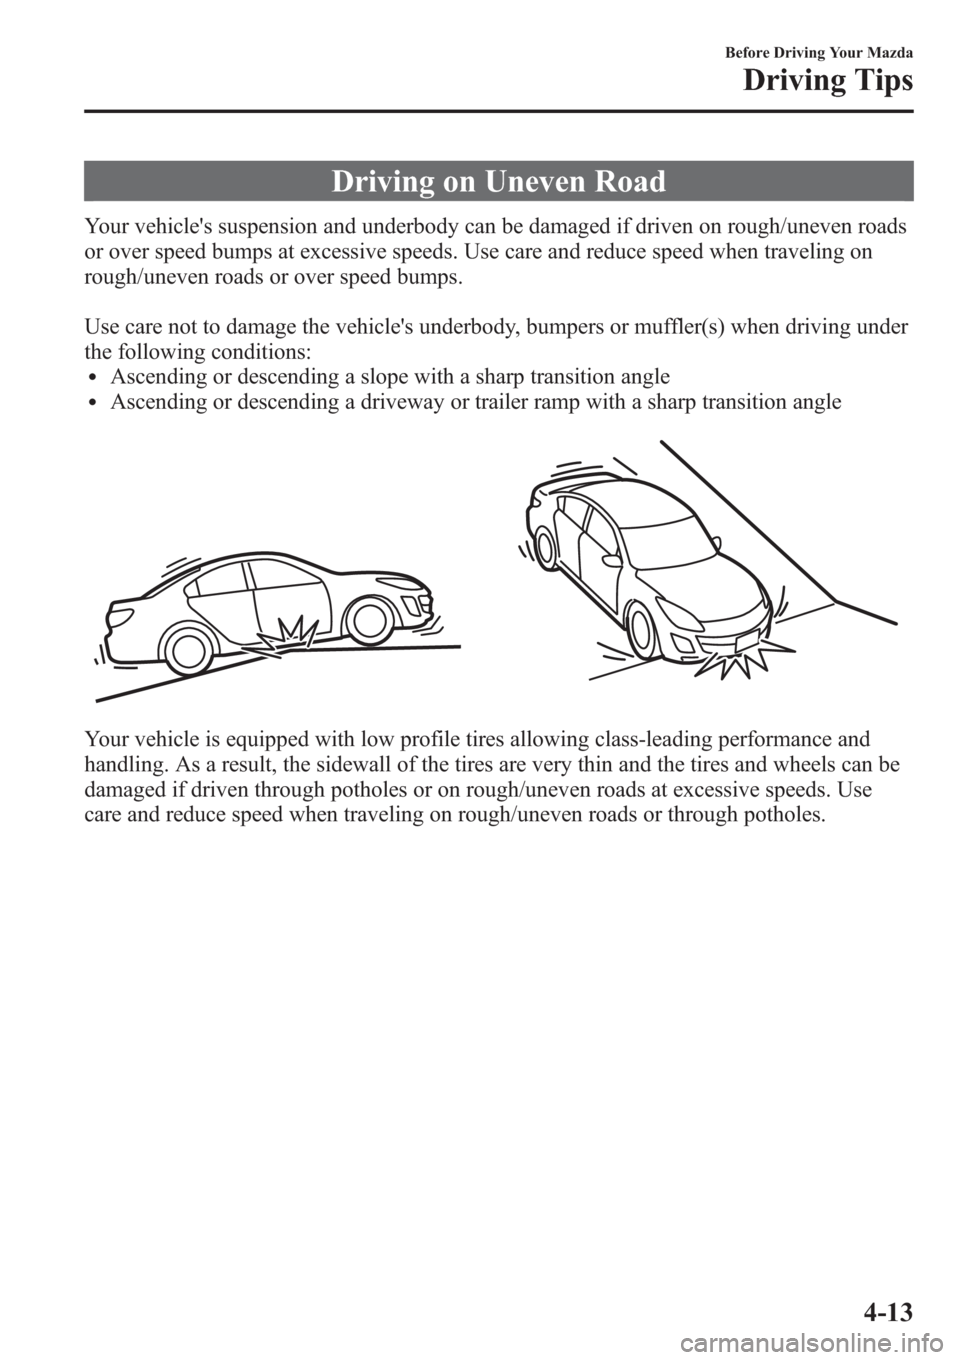 MAZDA MODEL 3 HATCHBACK 2013  Owners Manual (in English) Driving on Uneven Road
Your vehicles suspension and underbody can be damaged if driven on rough/uneven roads
or over speed bumps at excessive speeds. Use care and reduce speed when traveling on
rough